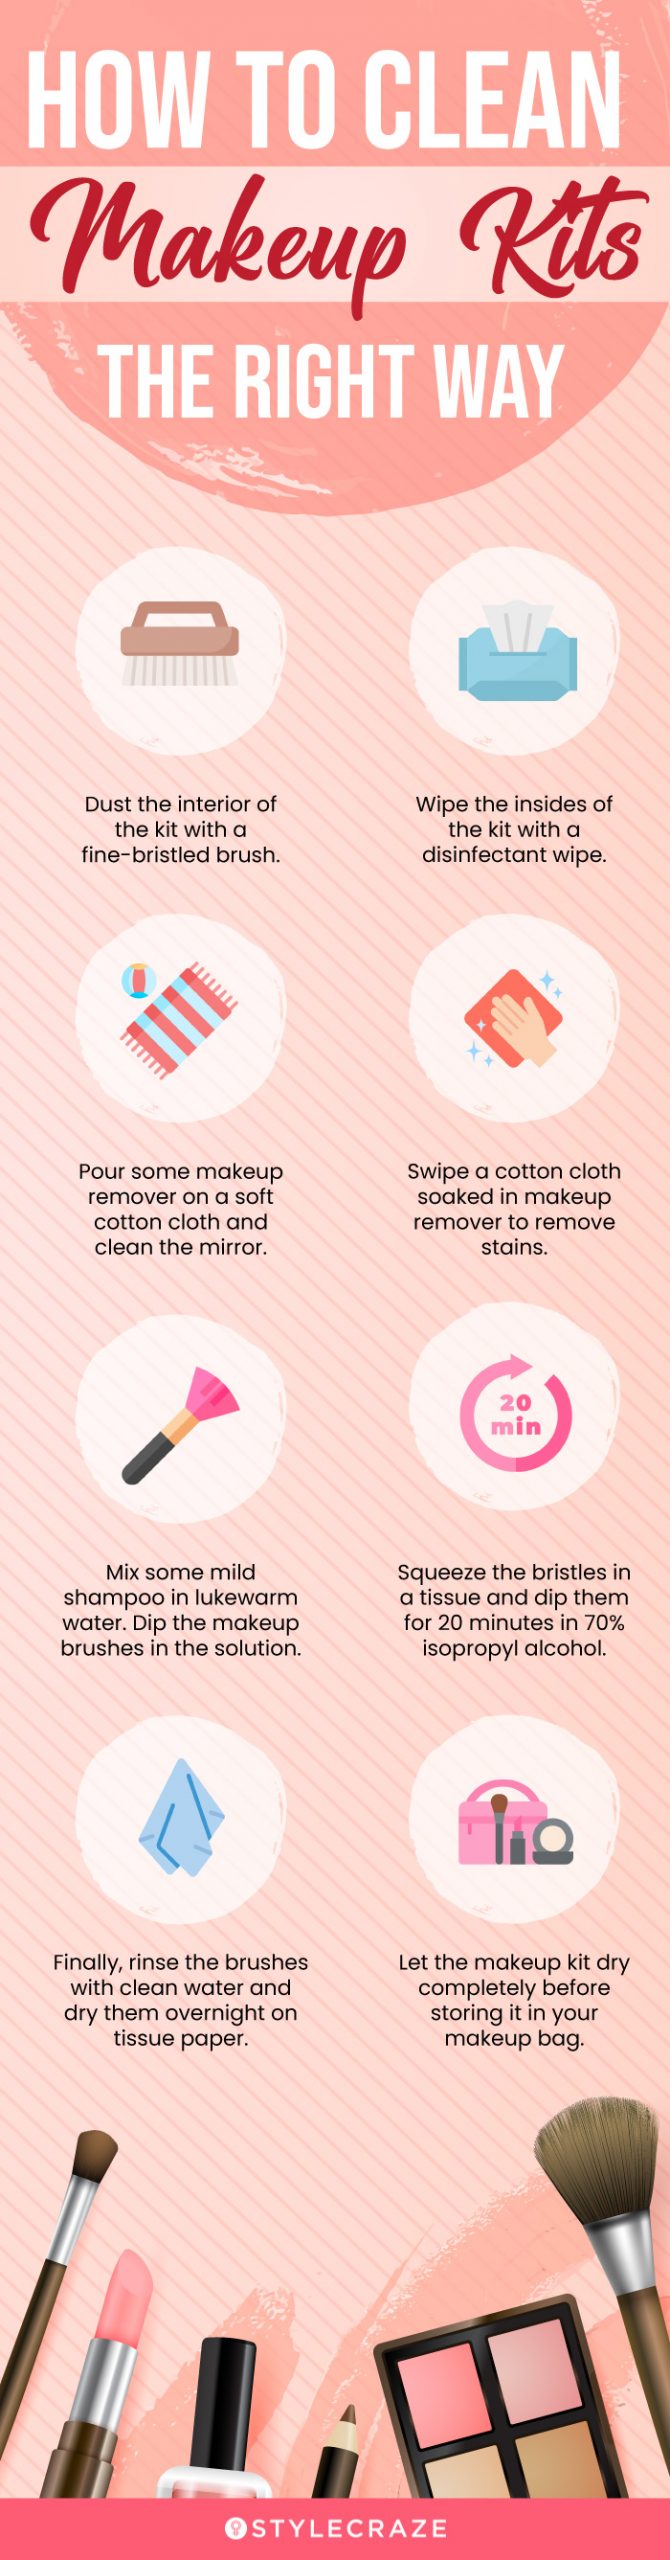 How To Clean Makeup Kits The Right Way (infographic)